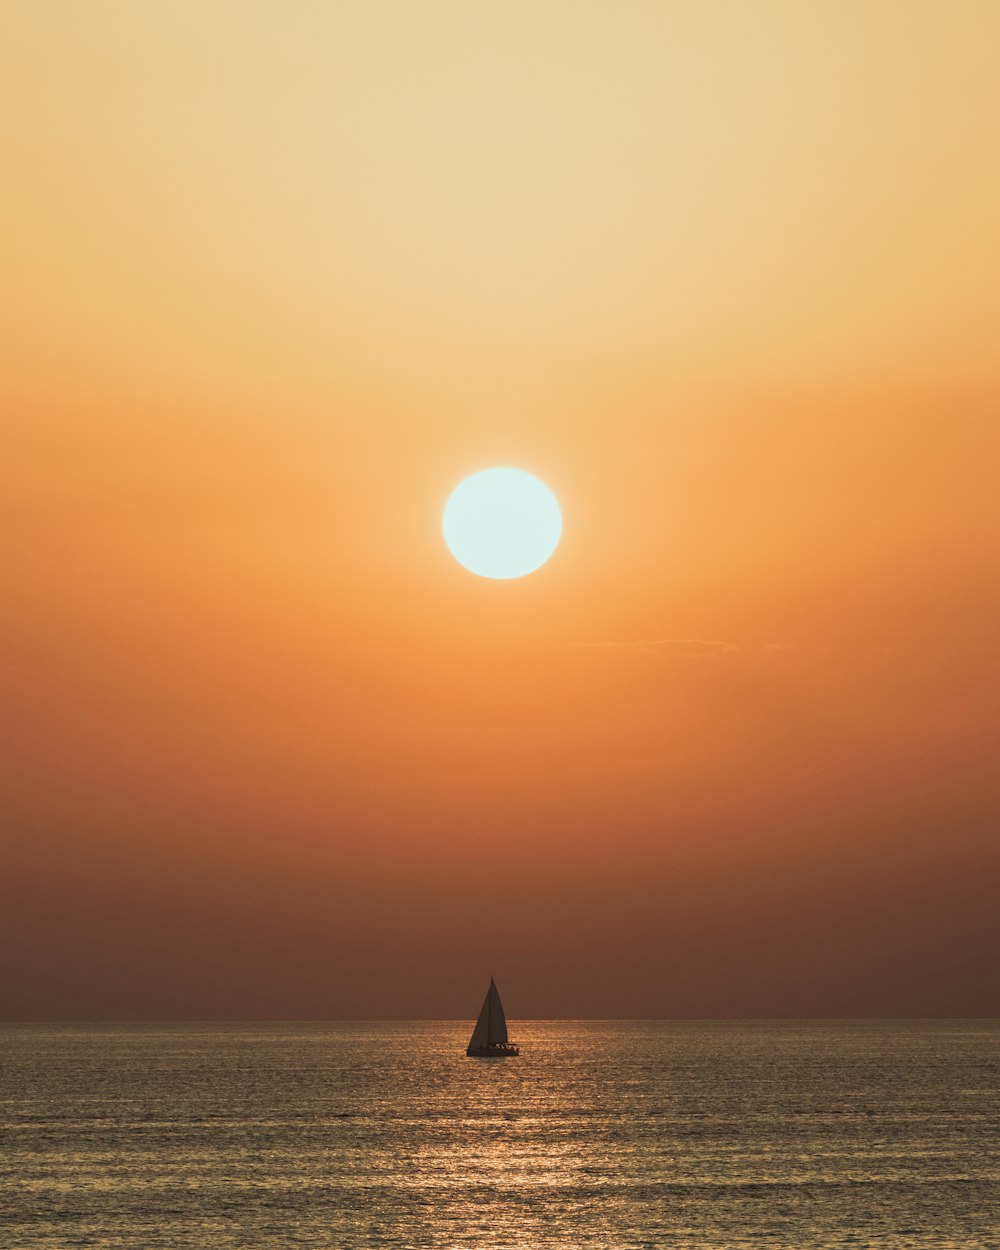 the sun is setting over the ocean with a sailboat in the foreground